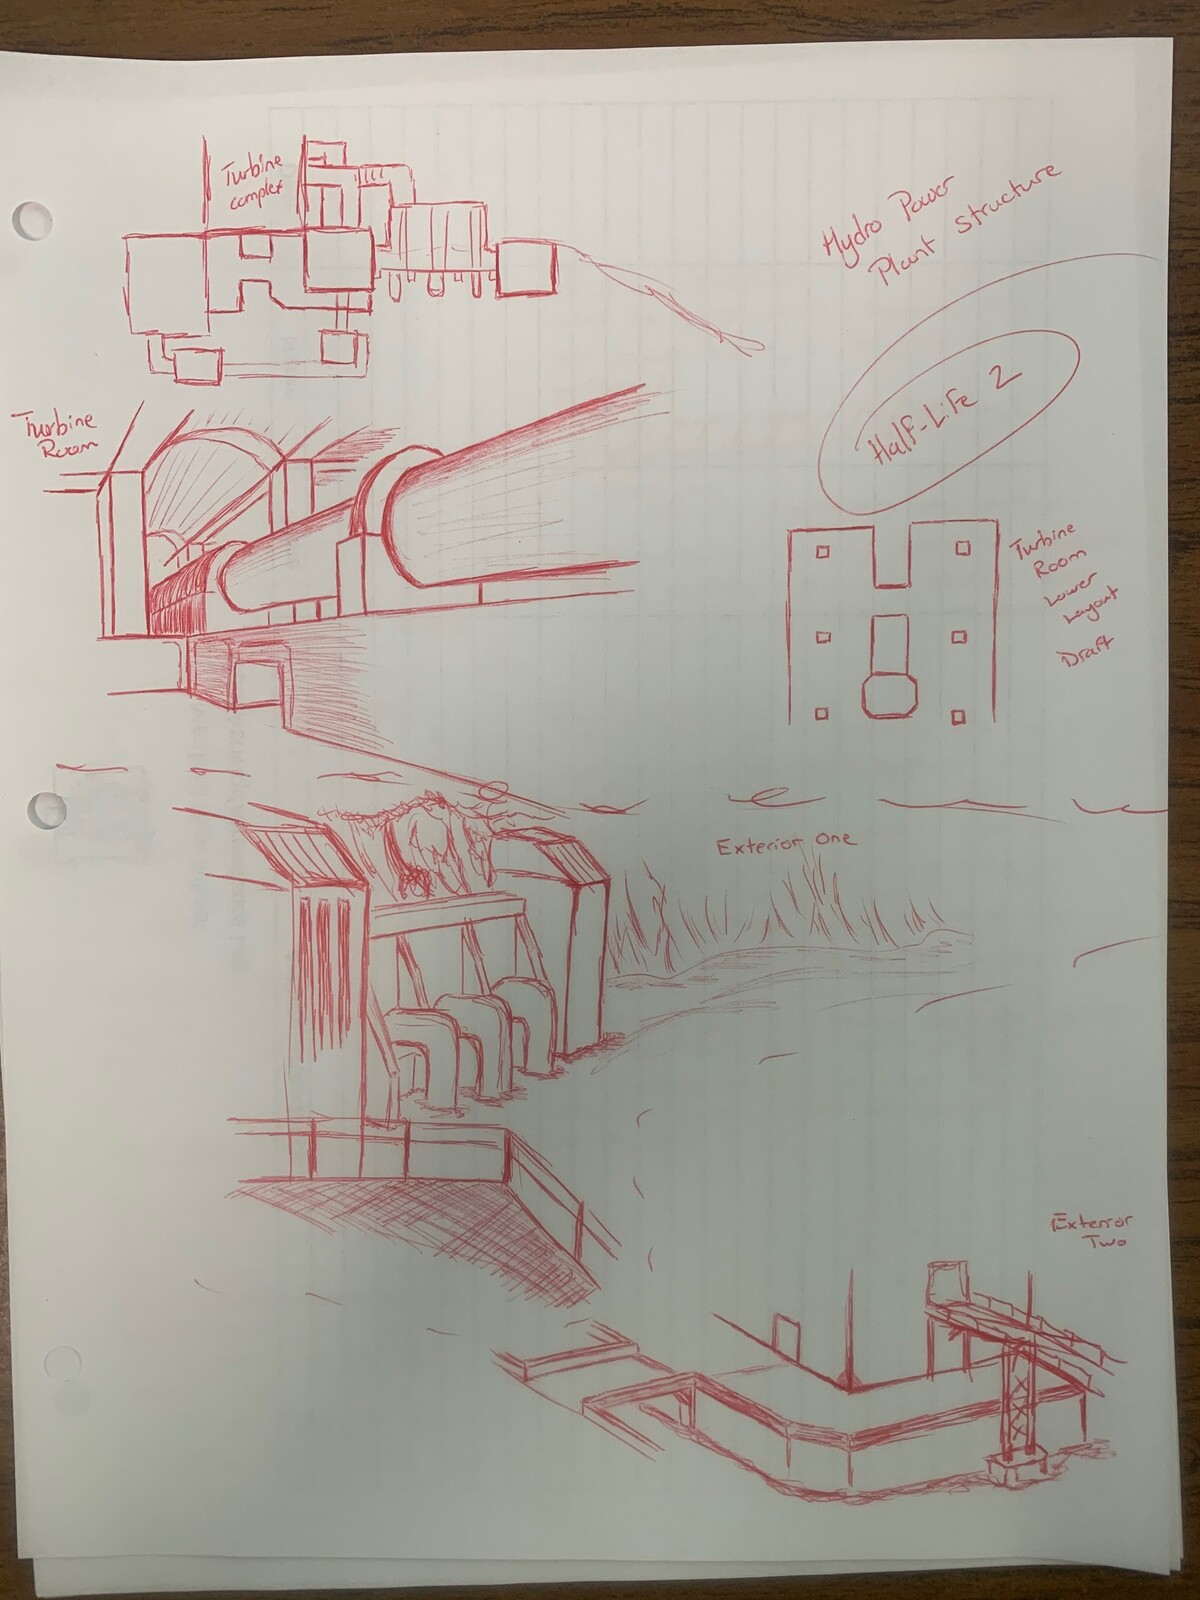 Small Layout and environment concepts. These were done prior to drafting a final layout or any engine work to get an idea about some of the spaces.